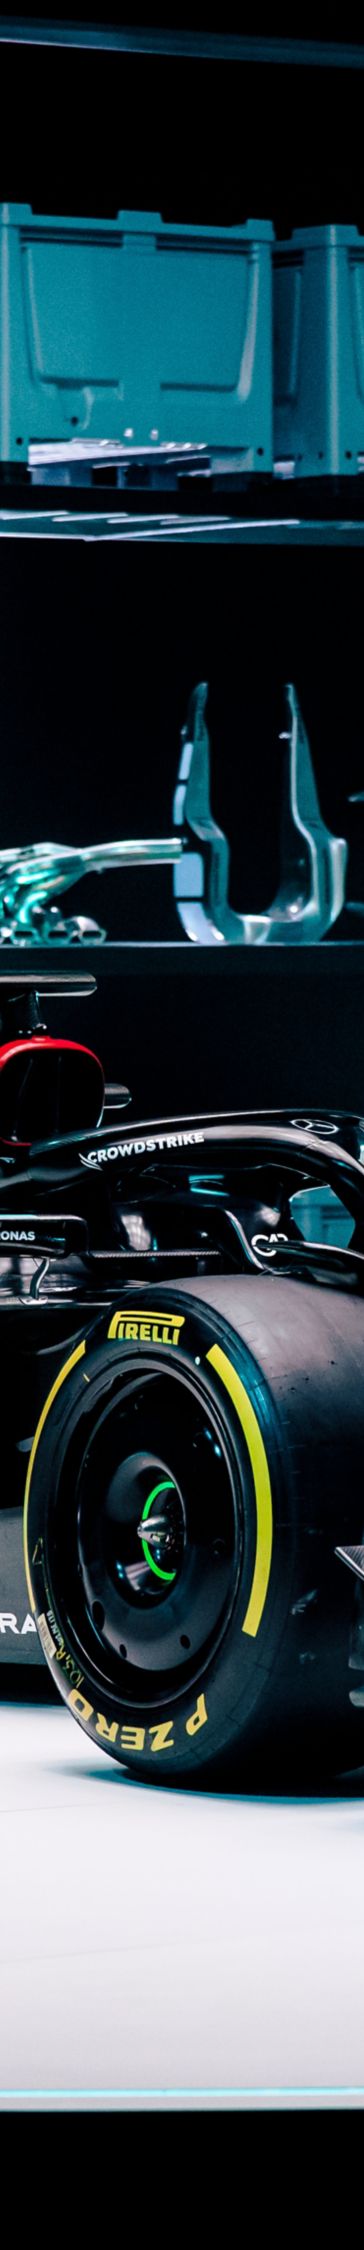 Lewis Hamilton's first Mercedes Formula One car sells for almost $29  million - Drive